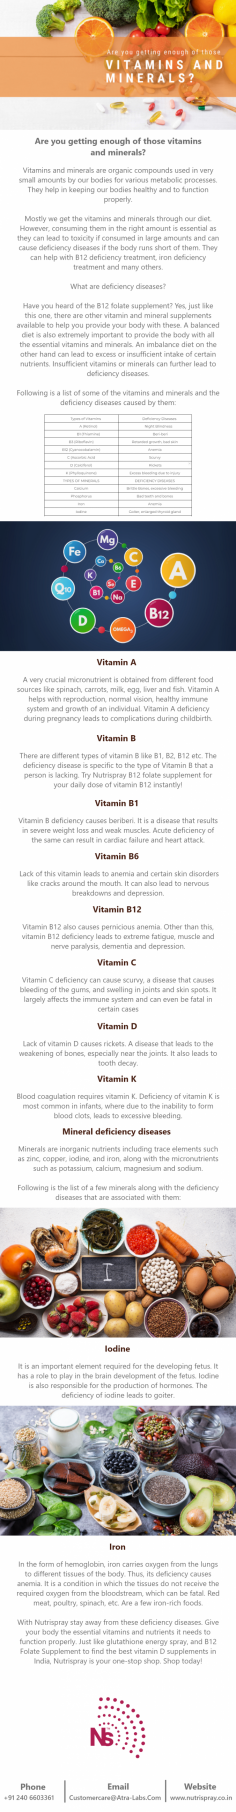 Mostly we get the vitamins and minerals through our diet. However, consuming them in the right amount is essential as they can lead to toxicity if consumed in large amounts and can cause deficiency diseases if the body runs short of them. They can help with B12 deficiency treatment, iron deficiency treatment and many others.

